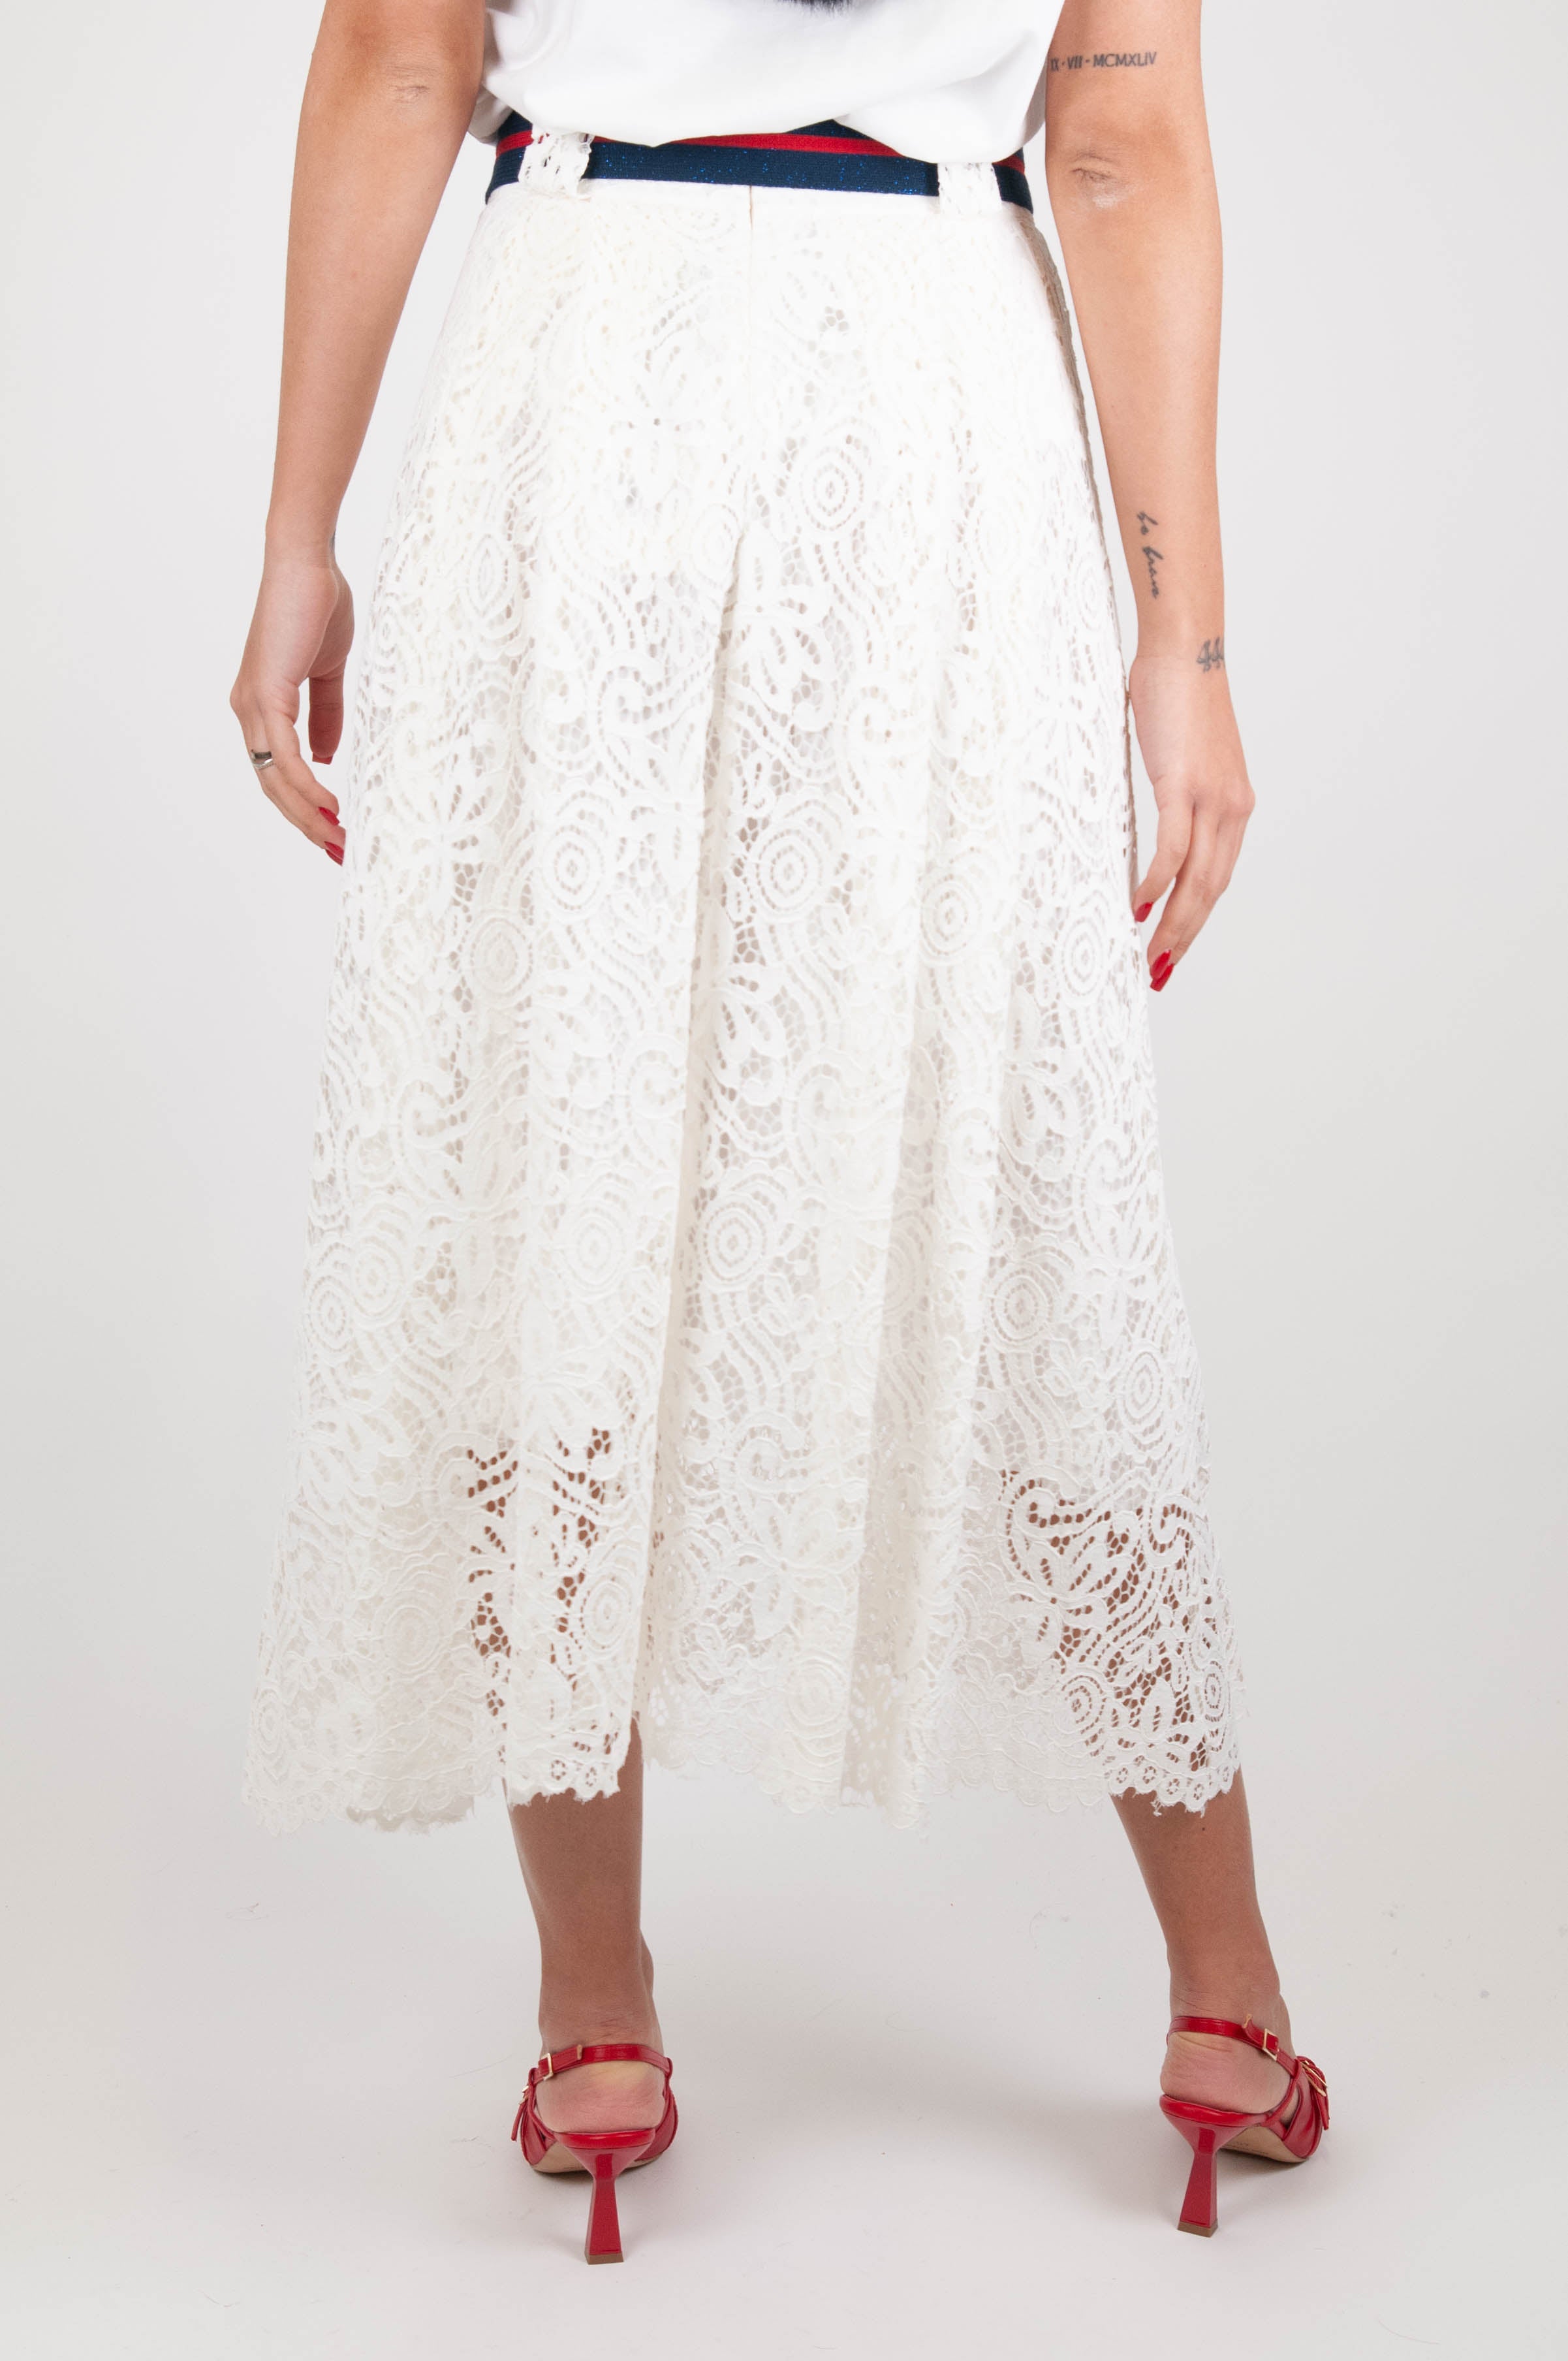 Tension in - Lace skirt with belt